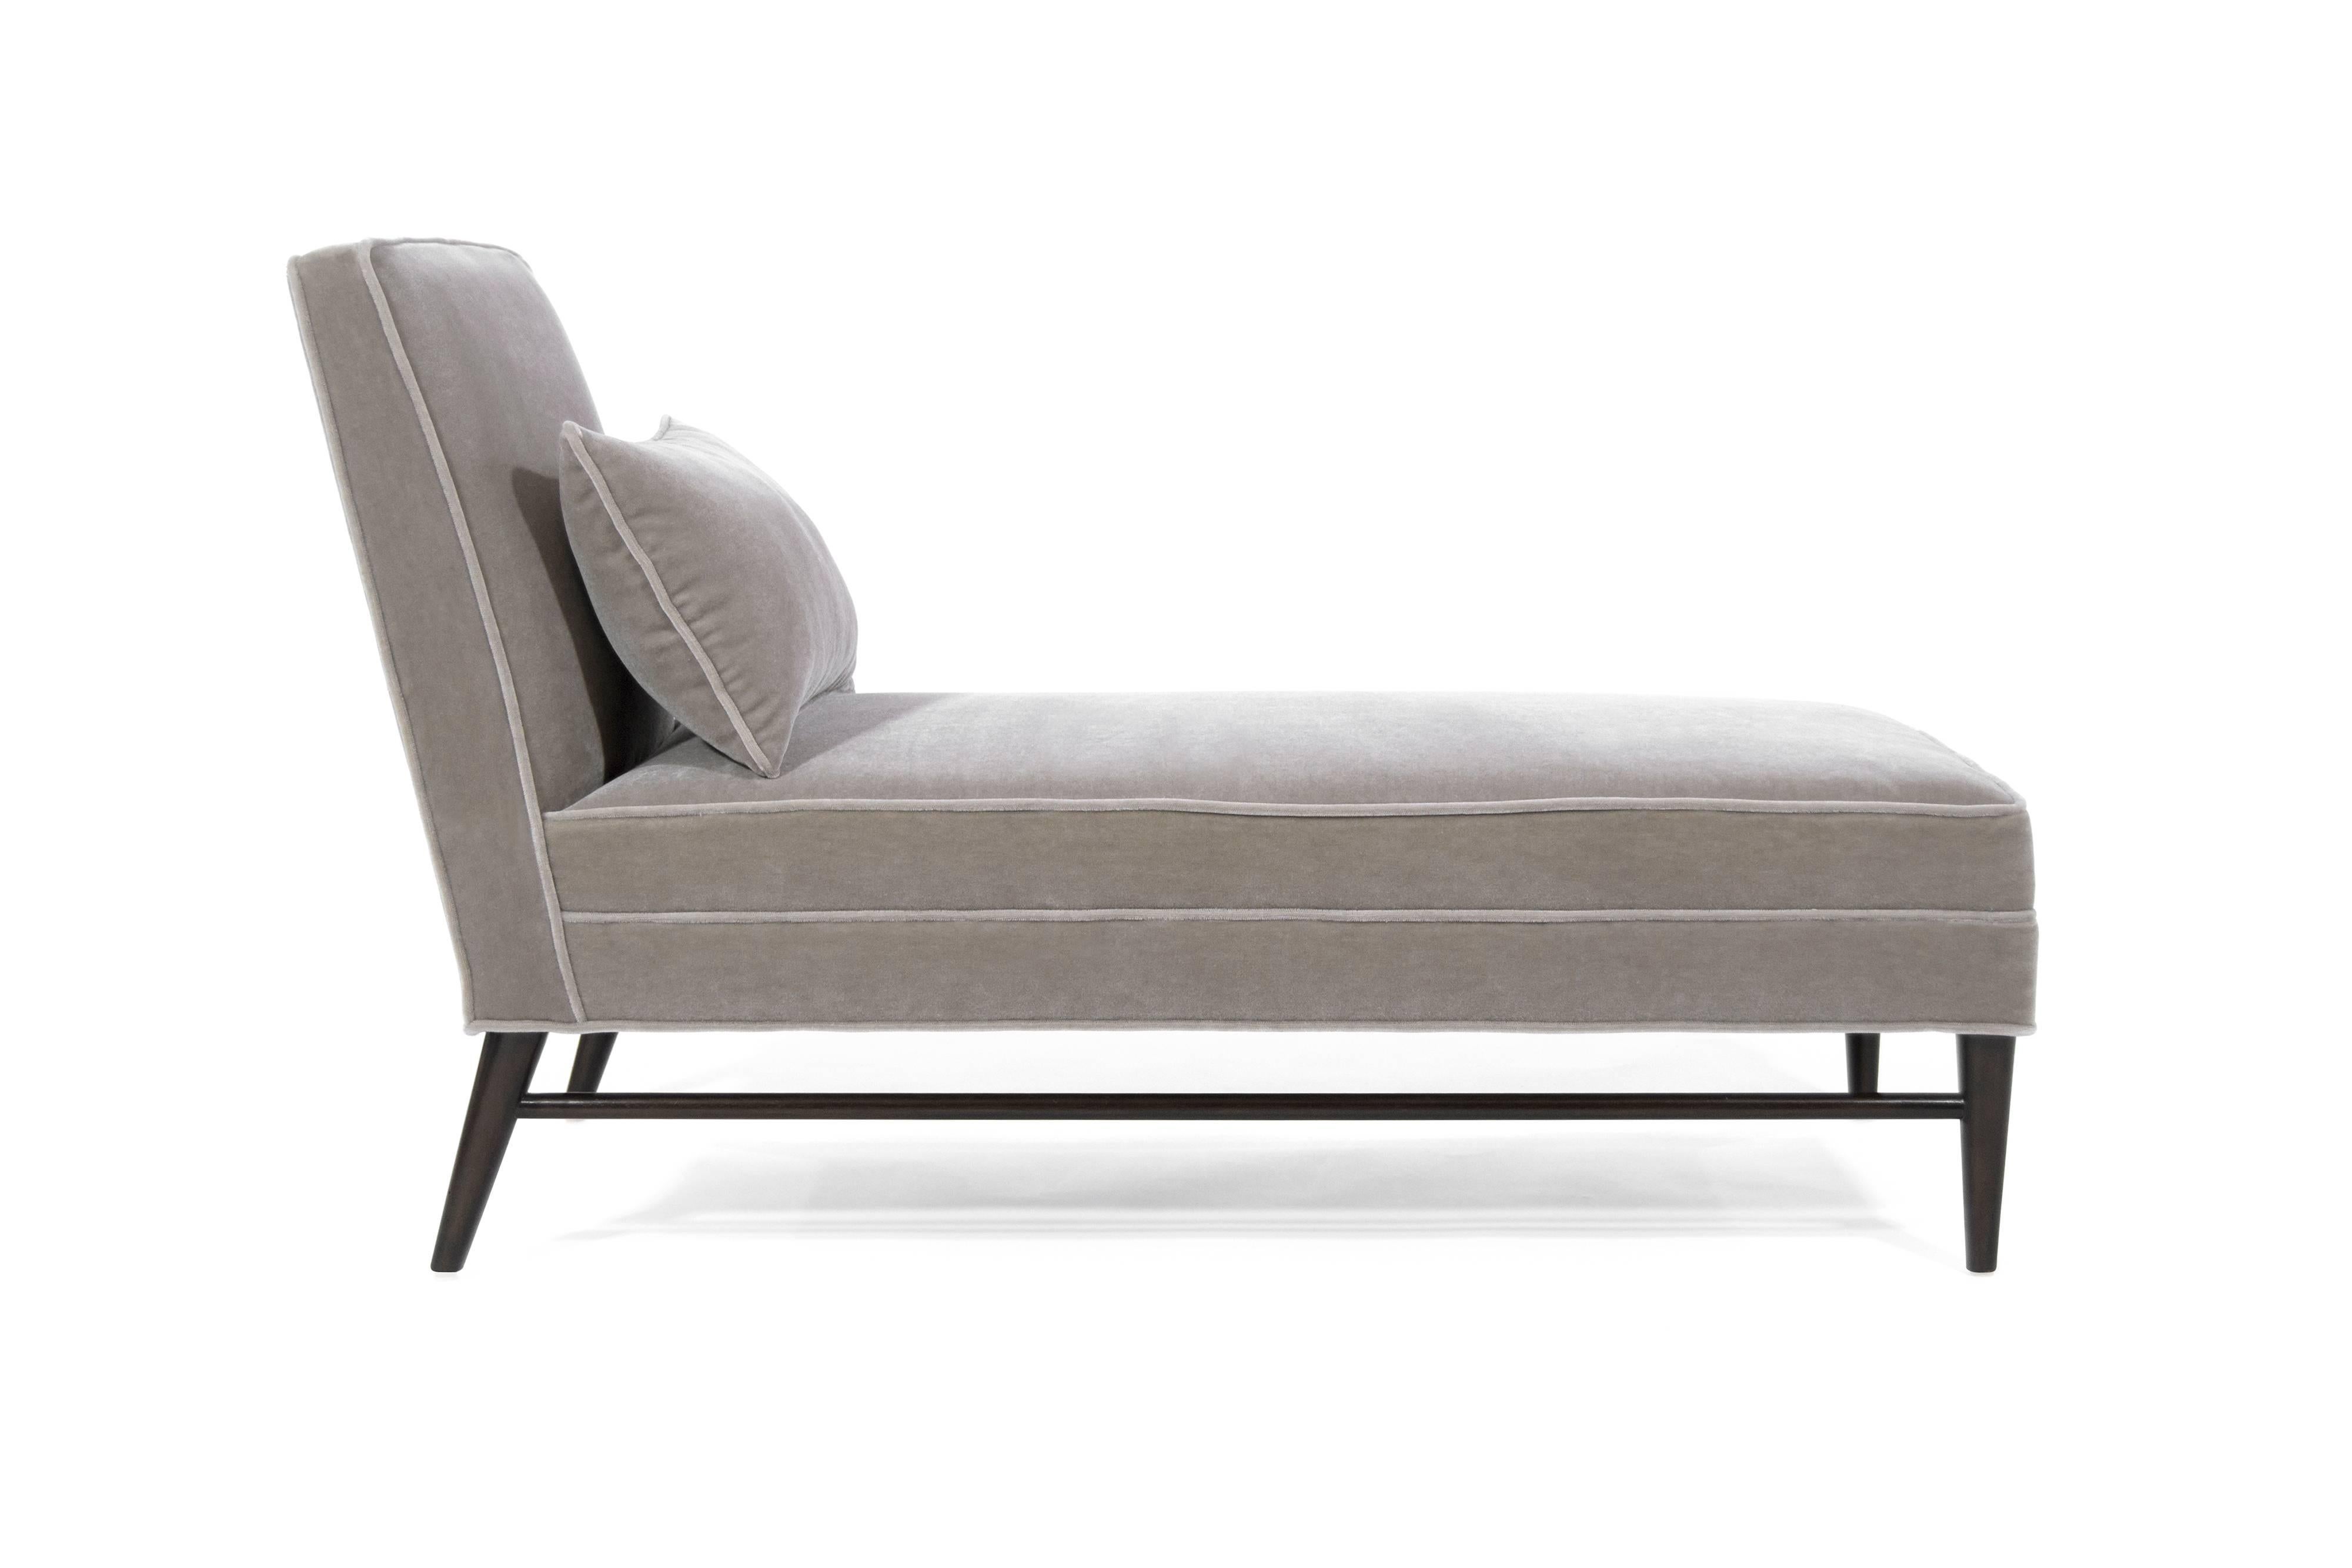 Rare chaise lounge designed by Paul McCobb for Directional.
Newly upholstered in grey mohair. Walnut base fully restored.